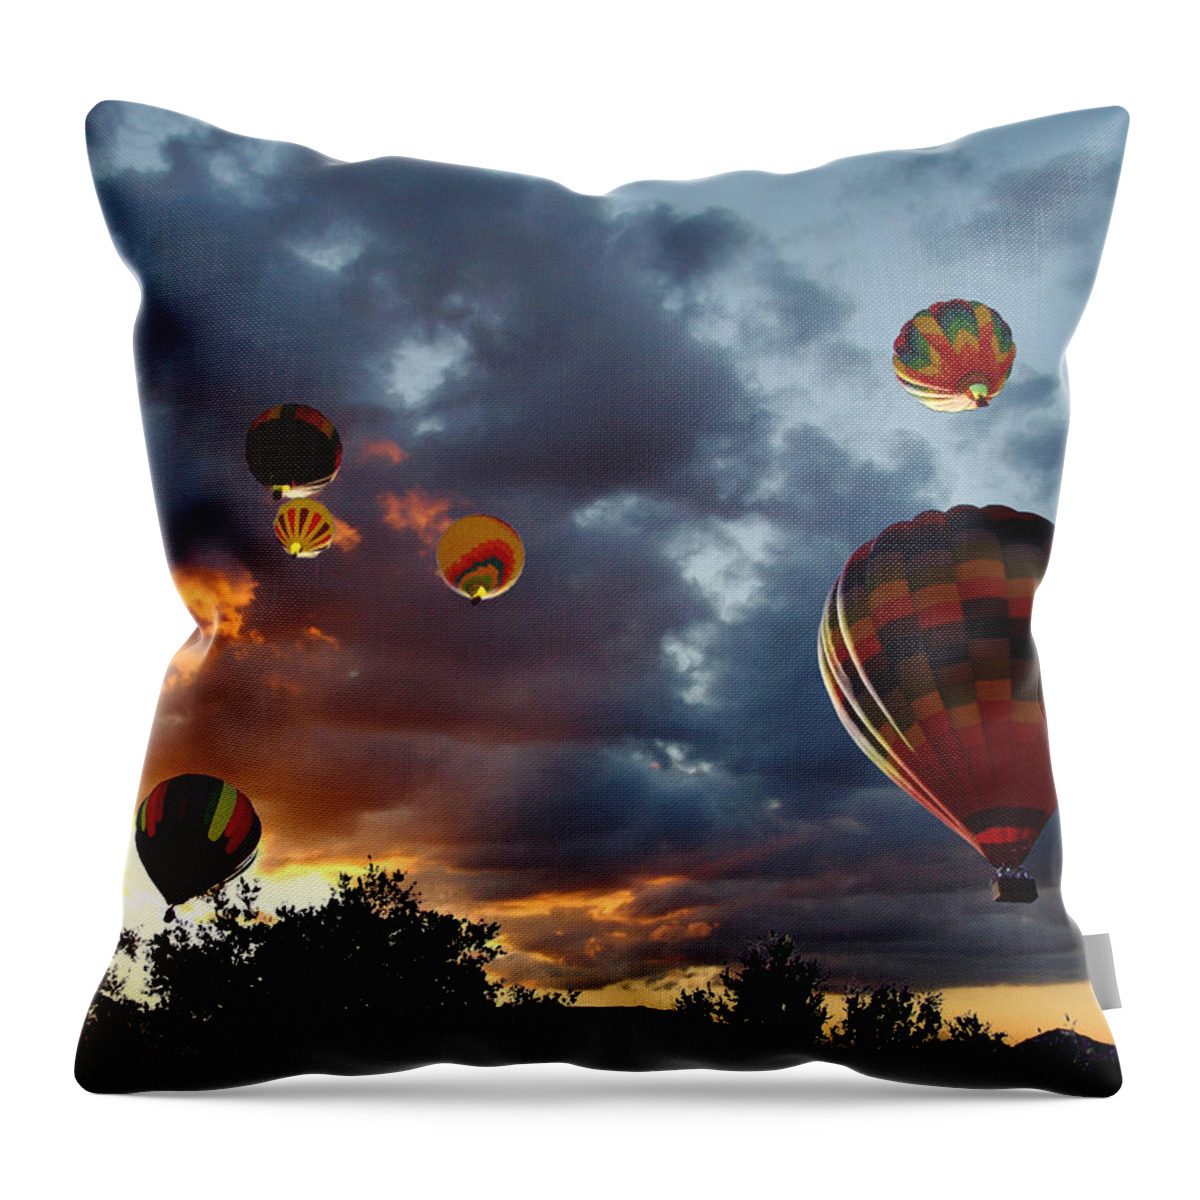 Hot Air Balloons Throw Pillow featuring the photograph Up Up and Away - Hot Air Balloons by Glenn McCarthy Art and Photography